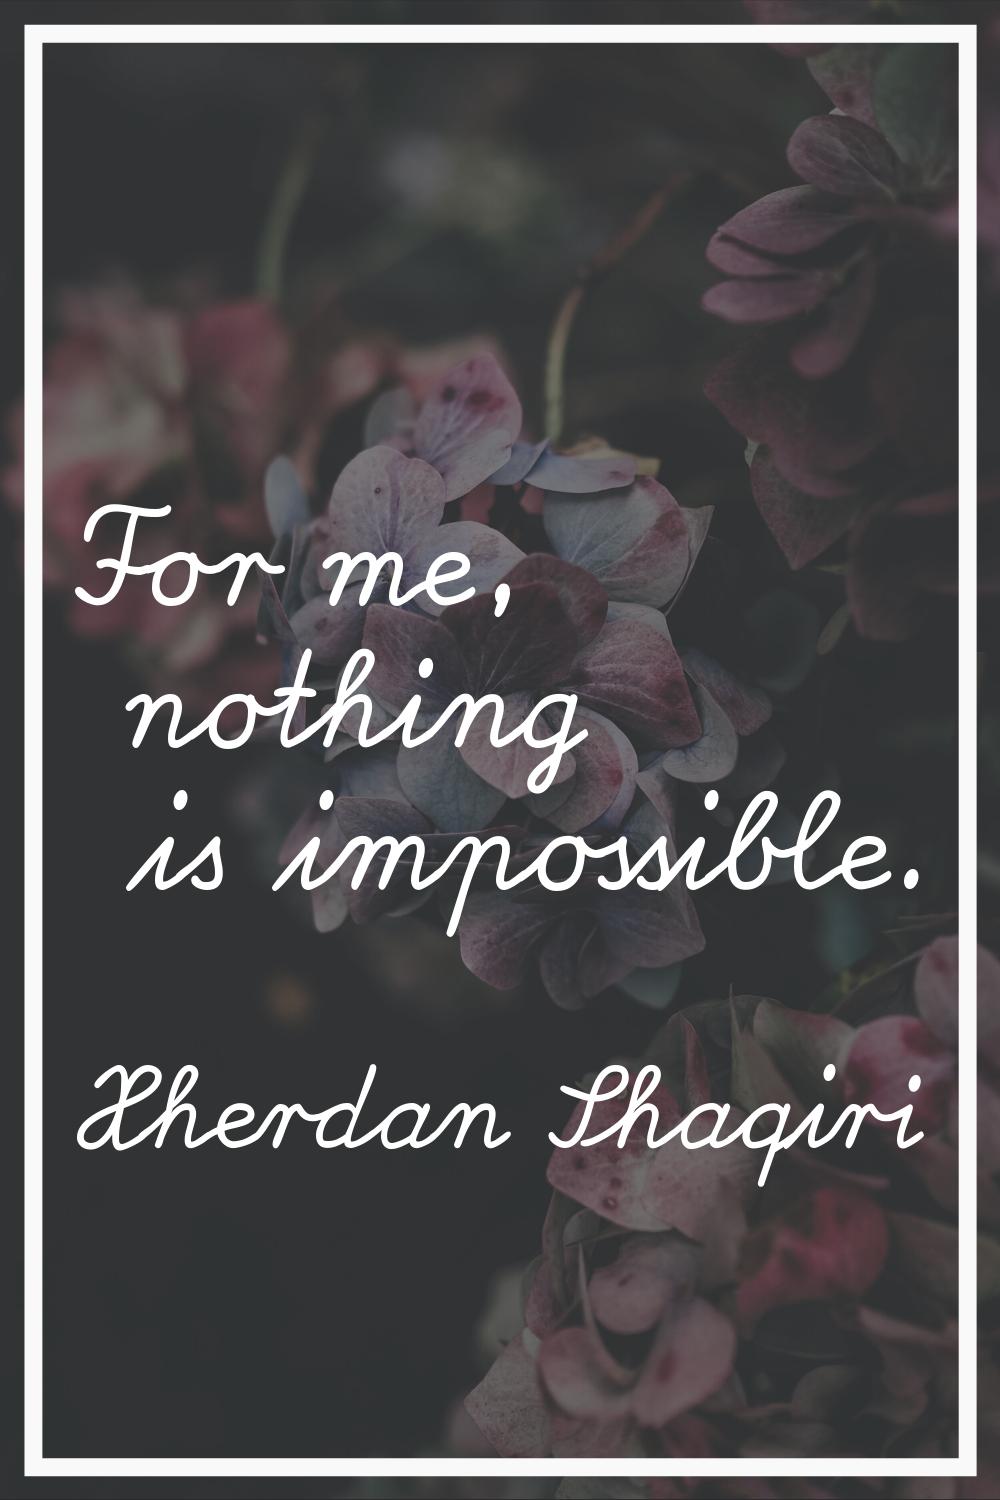 For me, nothing is impossible.